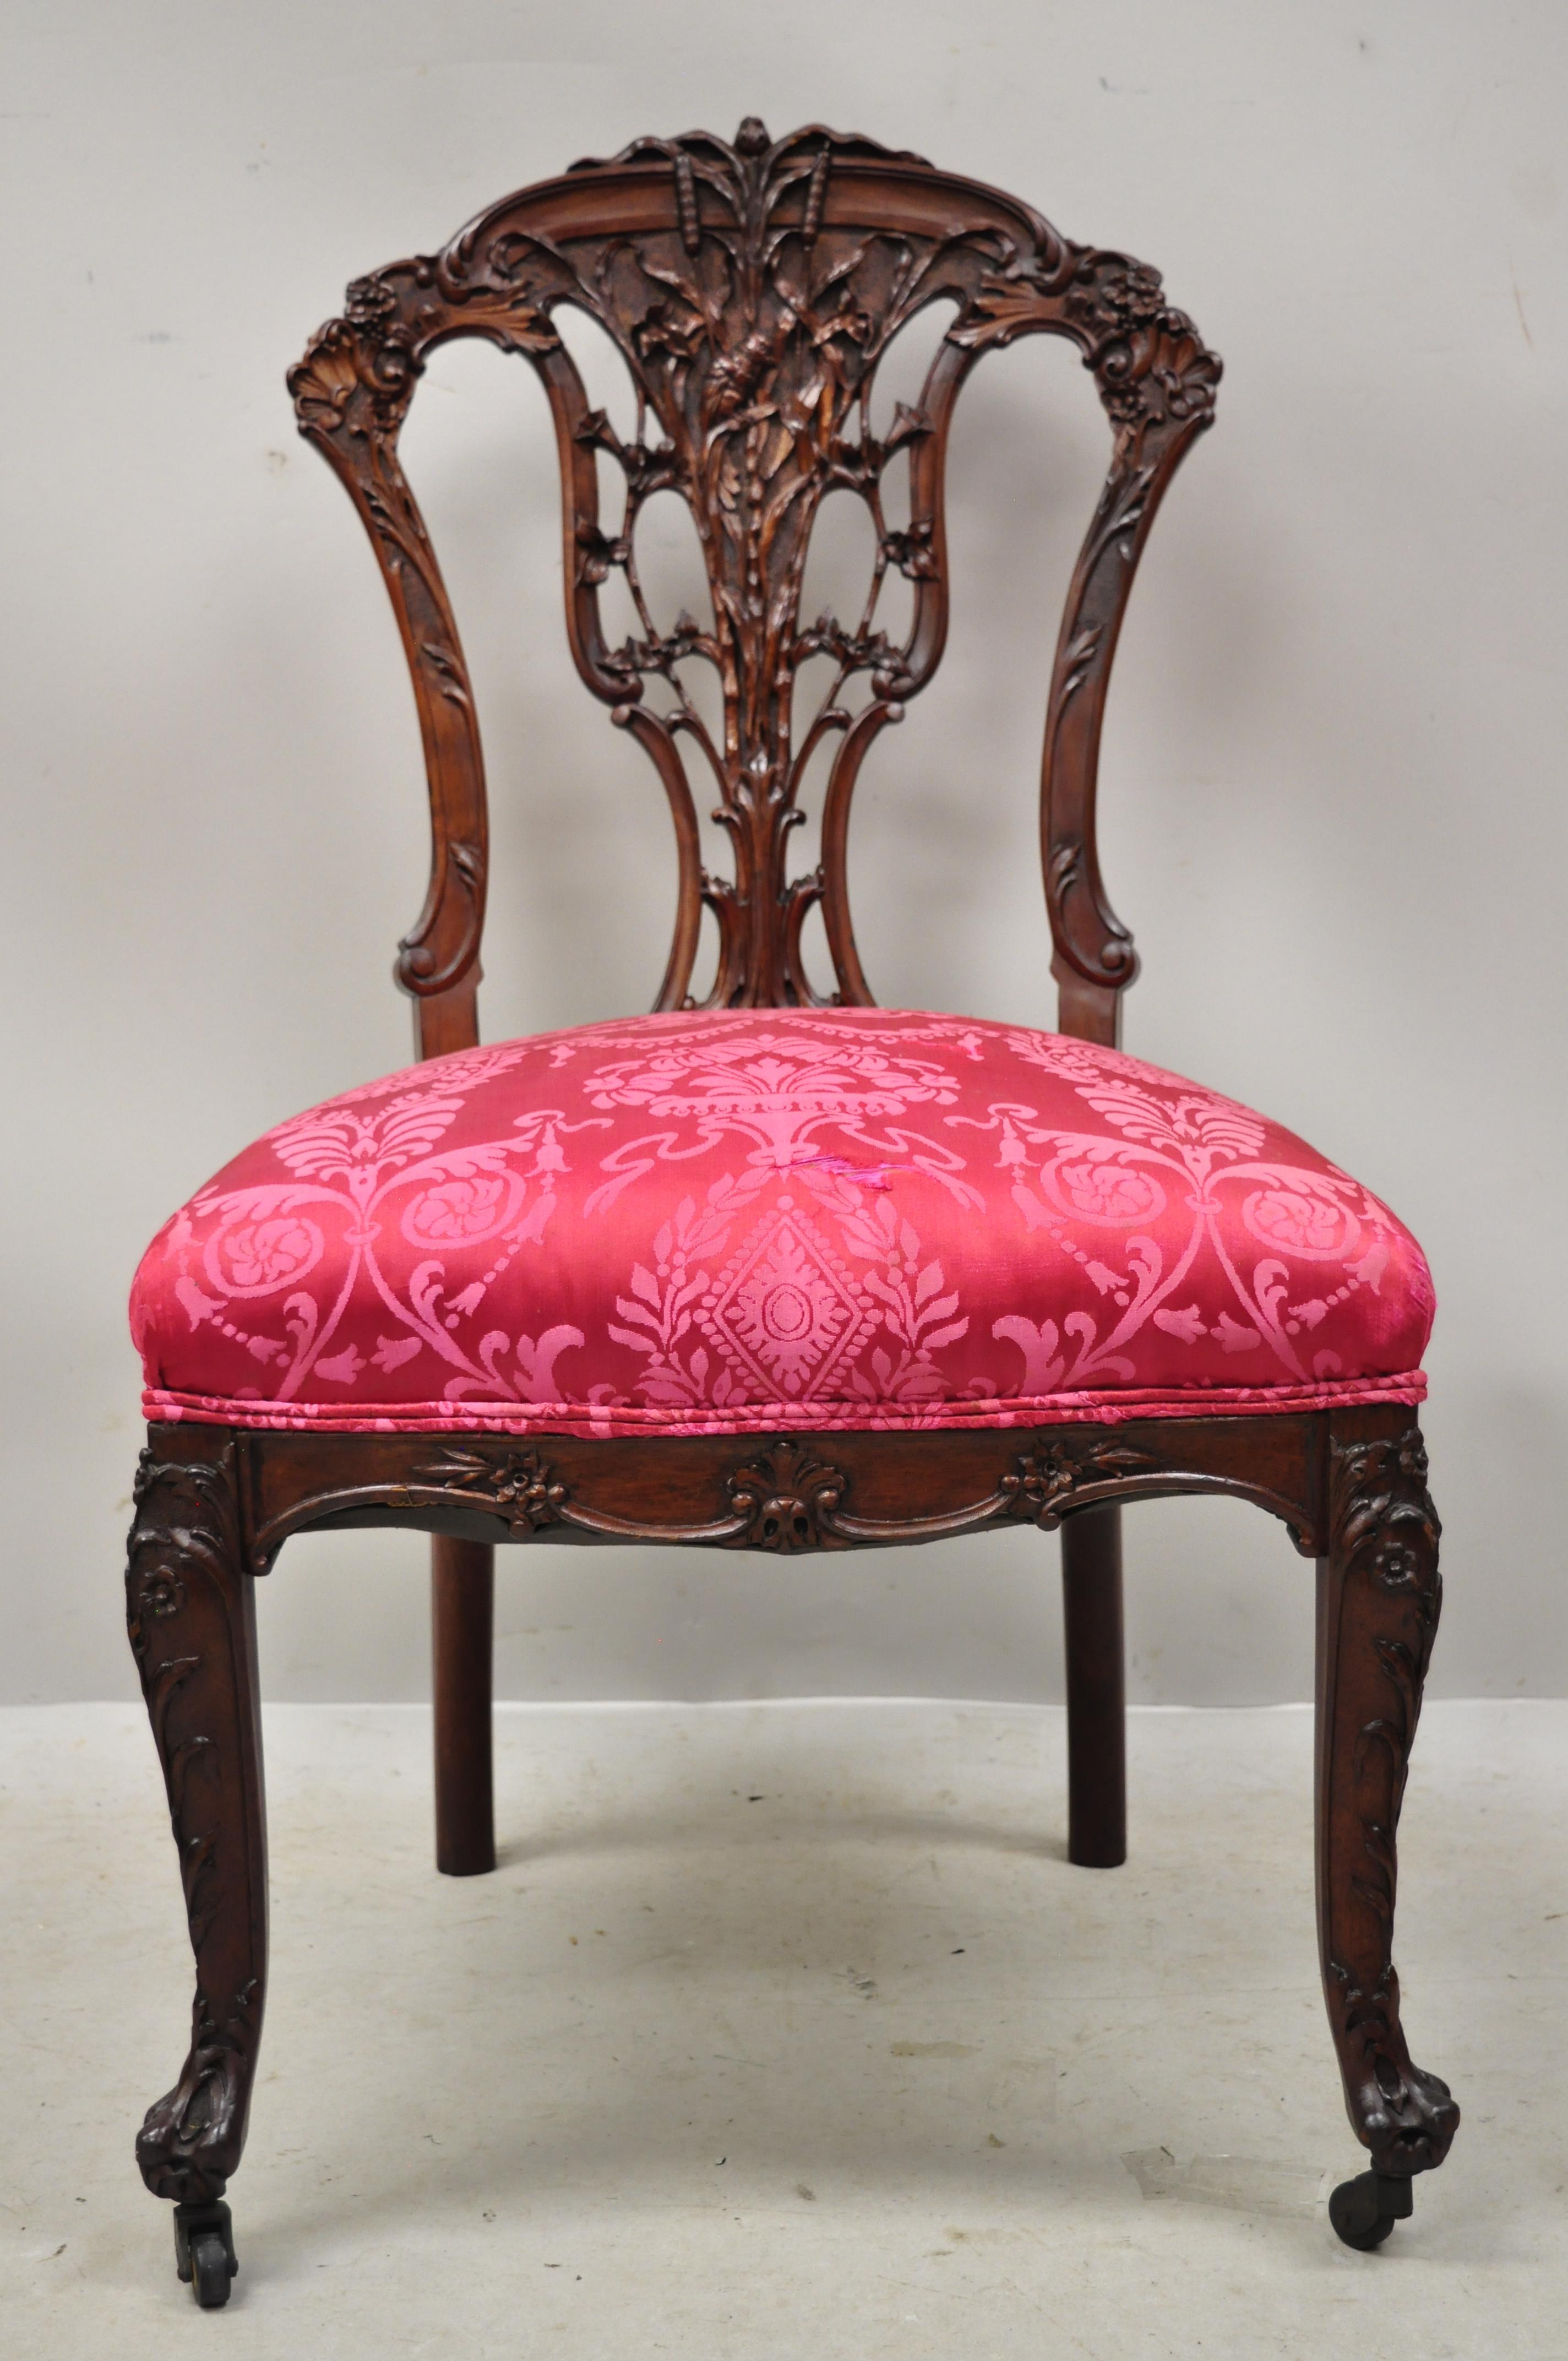 Antique French Art Nouveau bird and flower carved mahogany accent side chair. Item features solid wood frame, nicely carved details, cabriole legs, very nice antique item, circa early 1900s. Measurements: 35